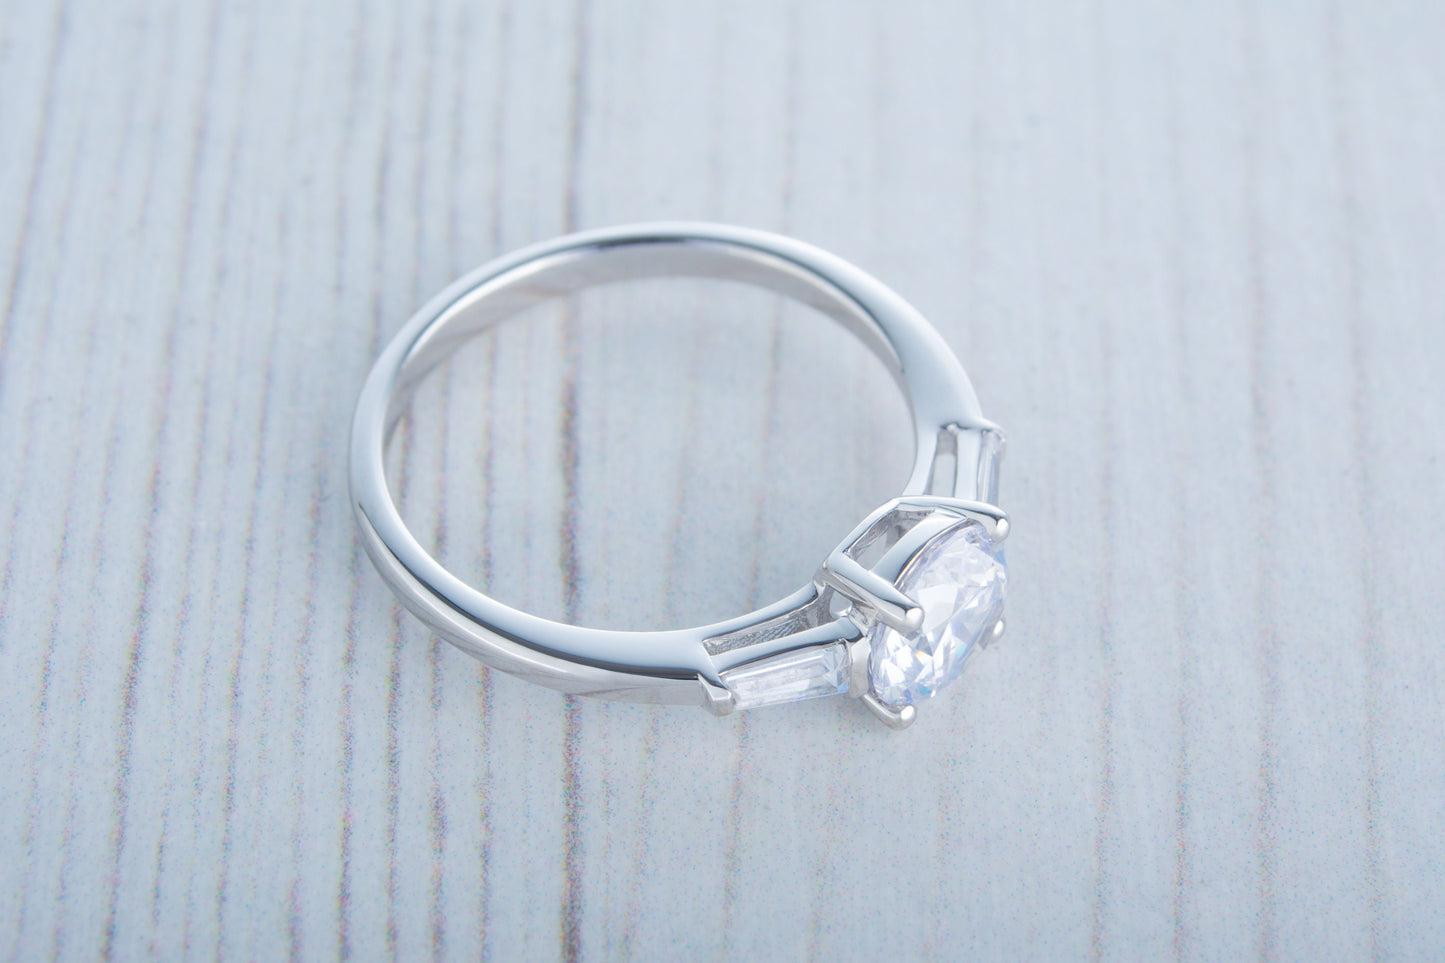 1.5ct Diamond simulant solitaire ring available in Sterling Silver or white gold filled - engagement ring